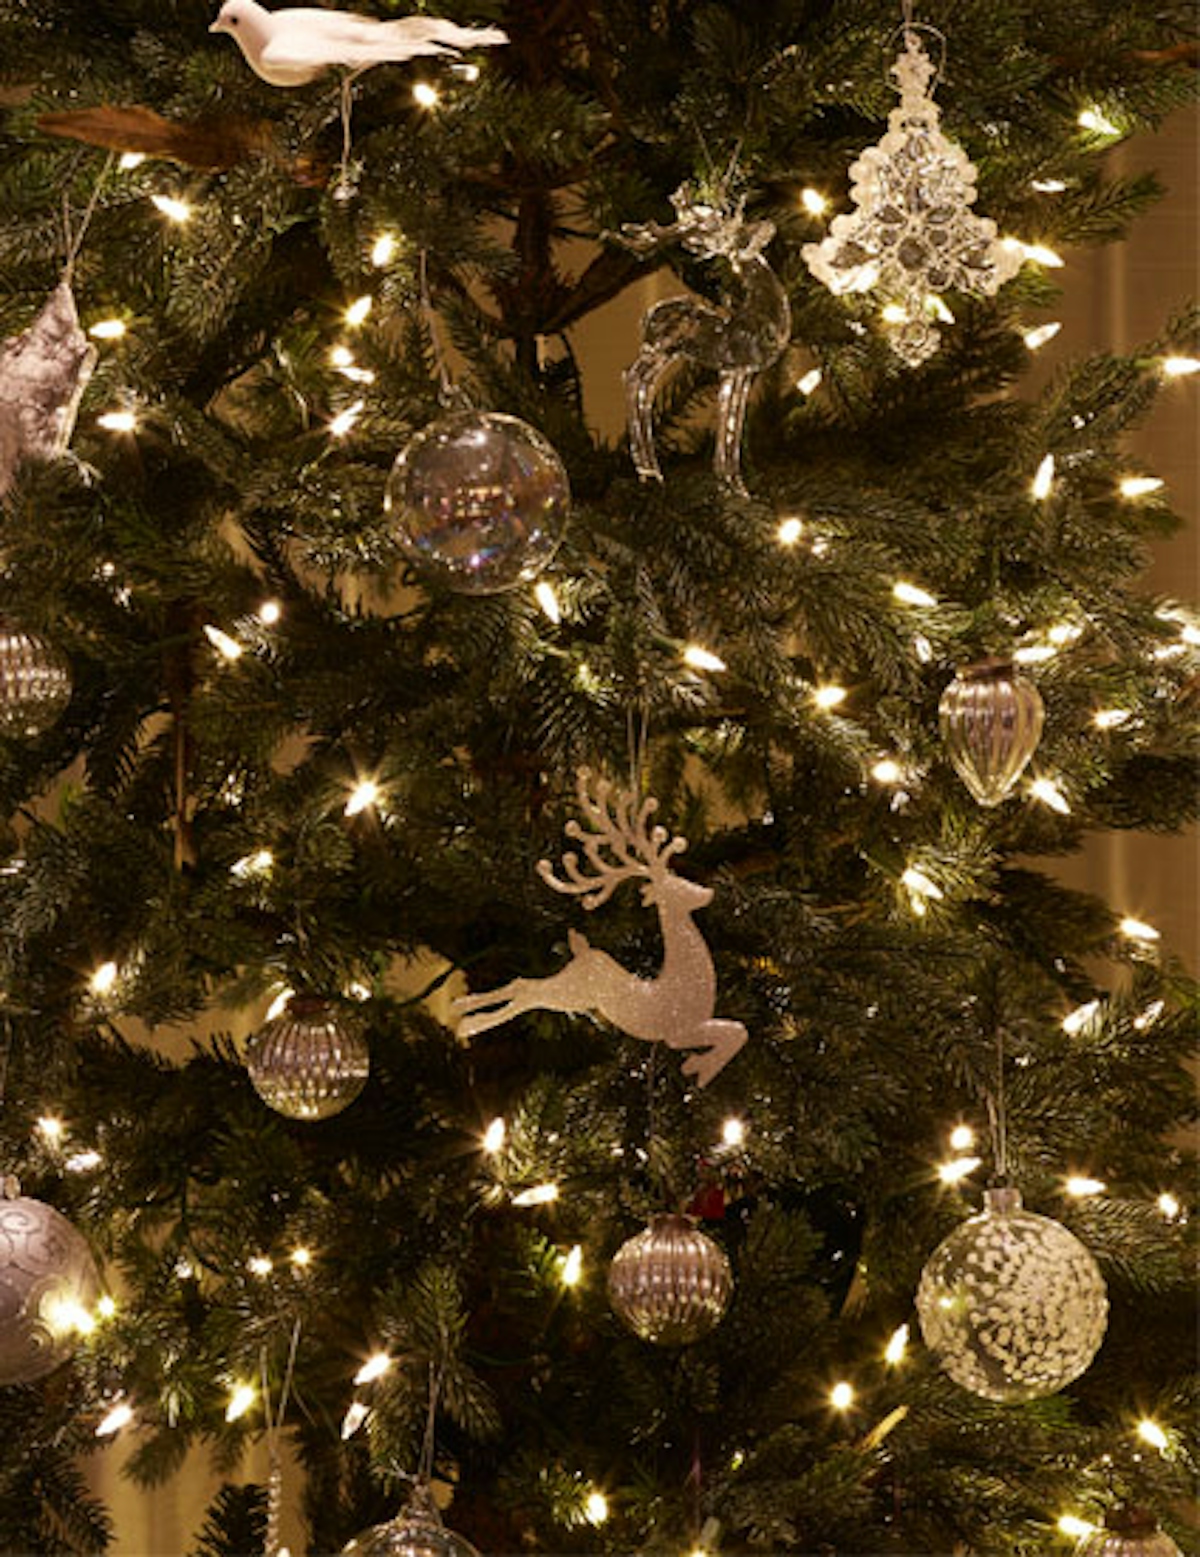 How To Decorate A Christmas Tree | Christmas Tree Decorating Tips from Jeff Leatham | Buy Luxury Christmas Ornaments at LuxDeco.com